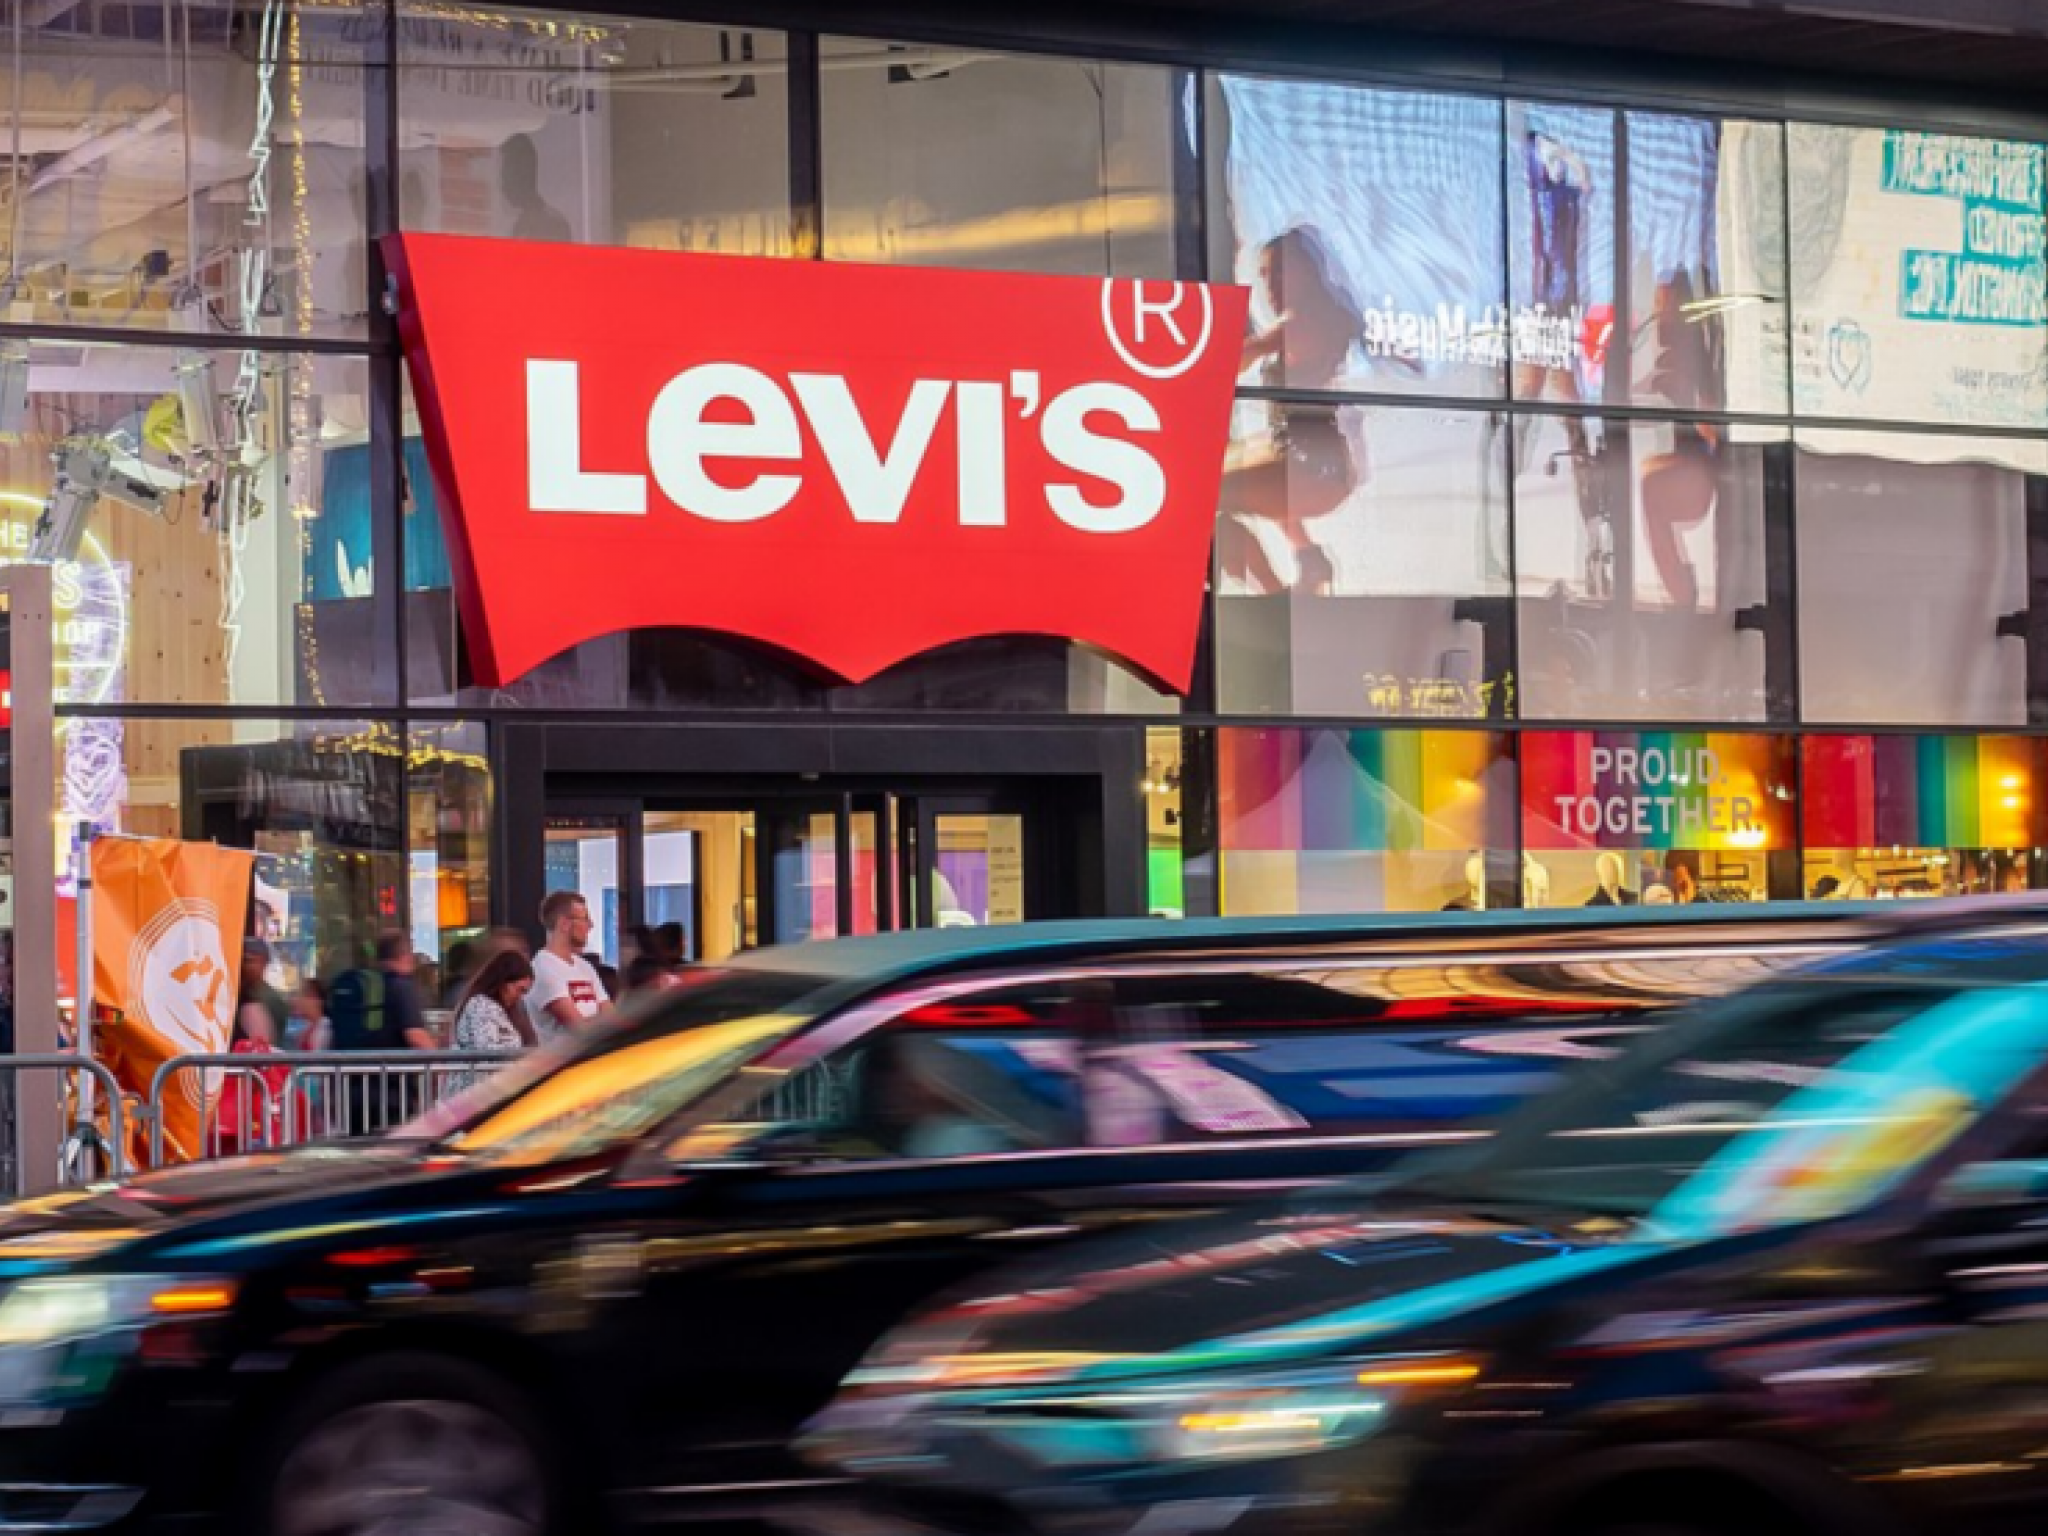  levis-continues-to-be-best-in-brand-despite-week-outlook-say-analysts 